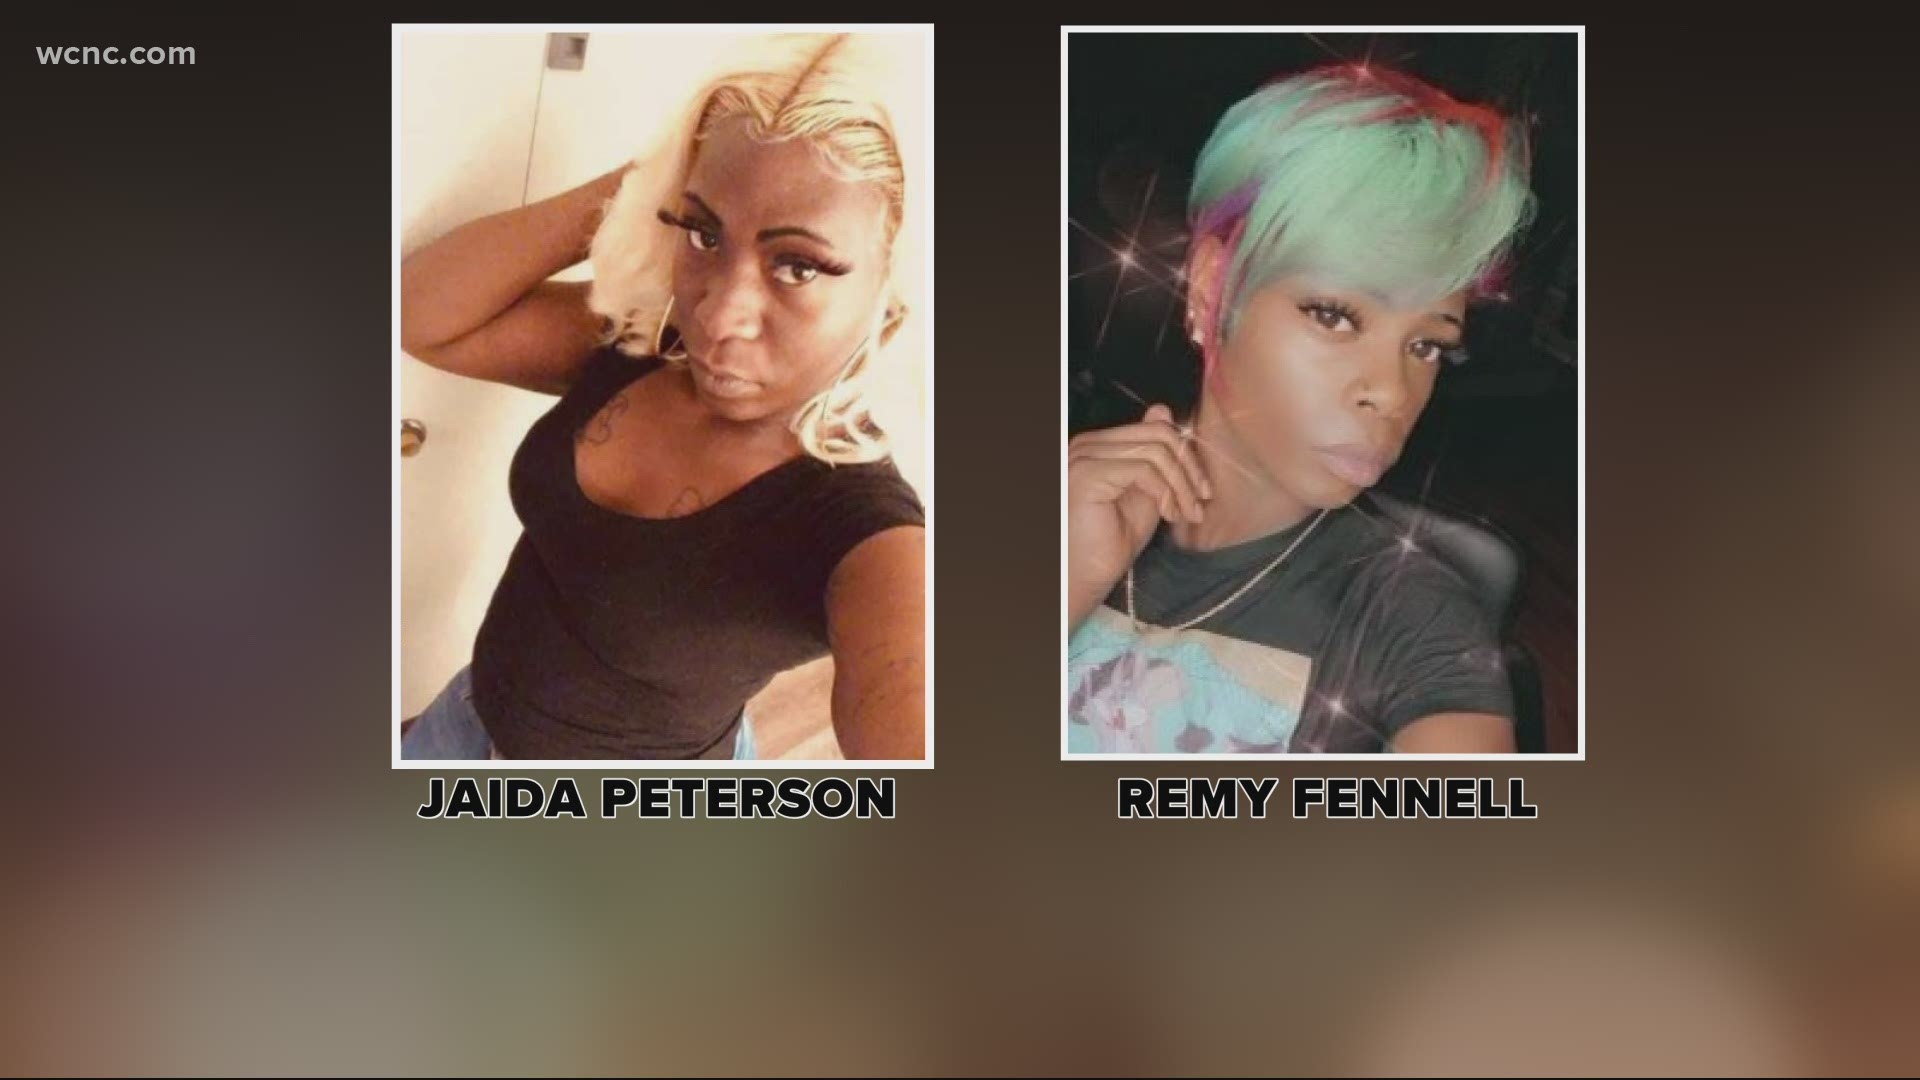 Detectives said there are similarities in how and where the victims were killed. Trans rights groups want answers.